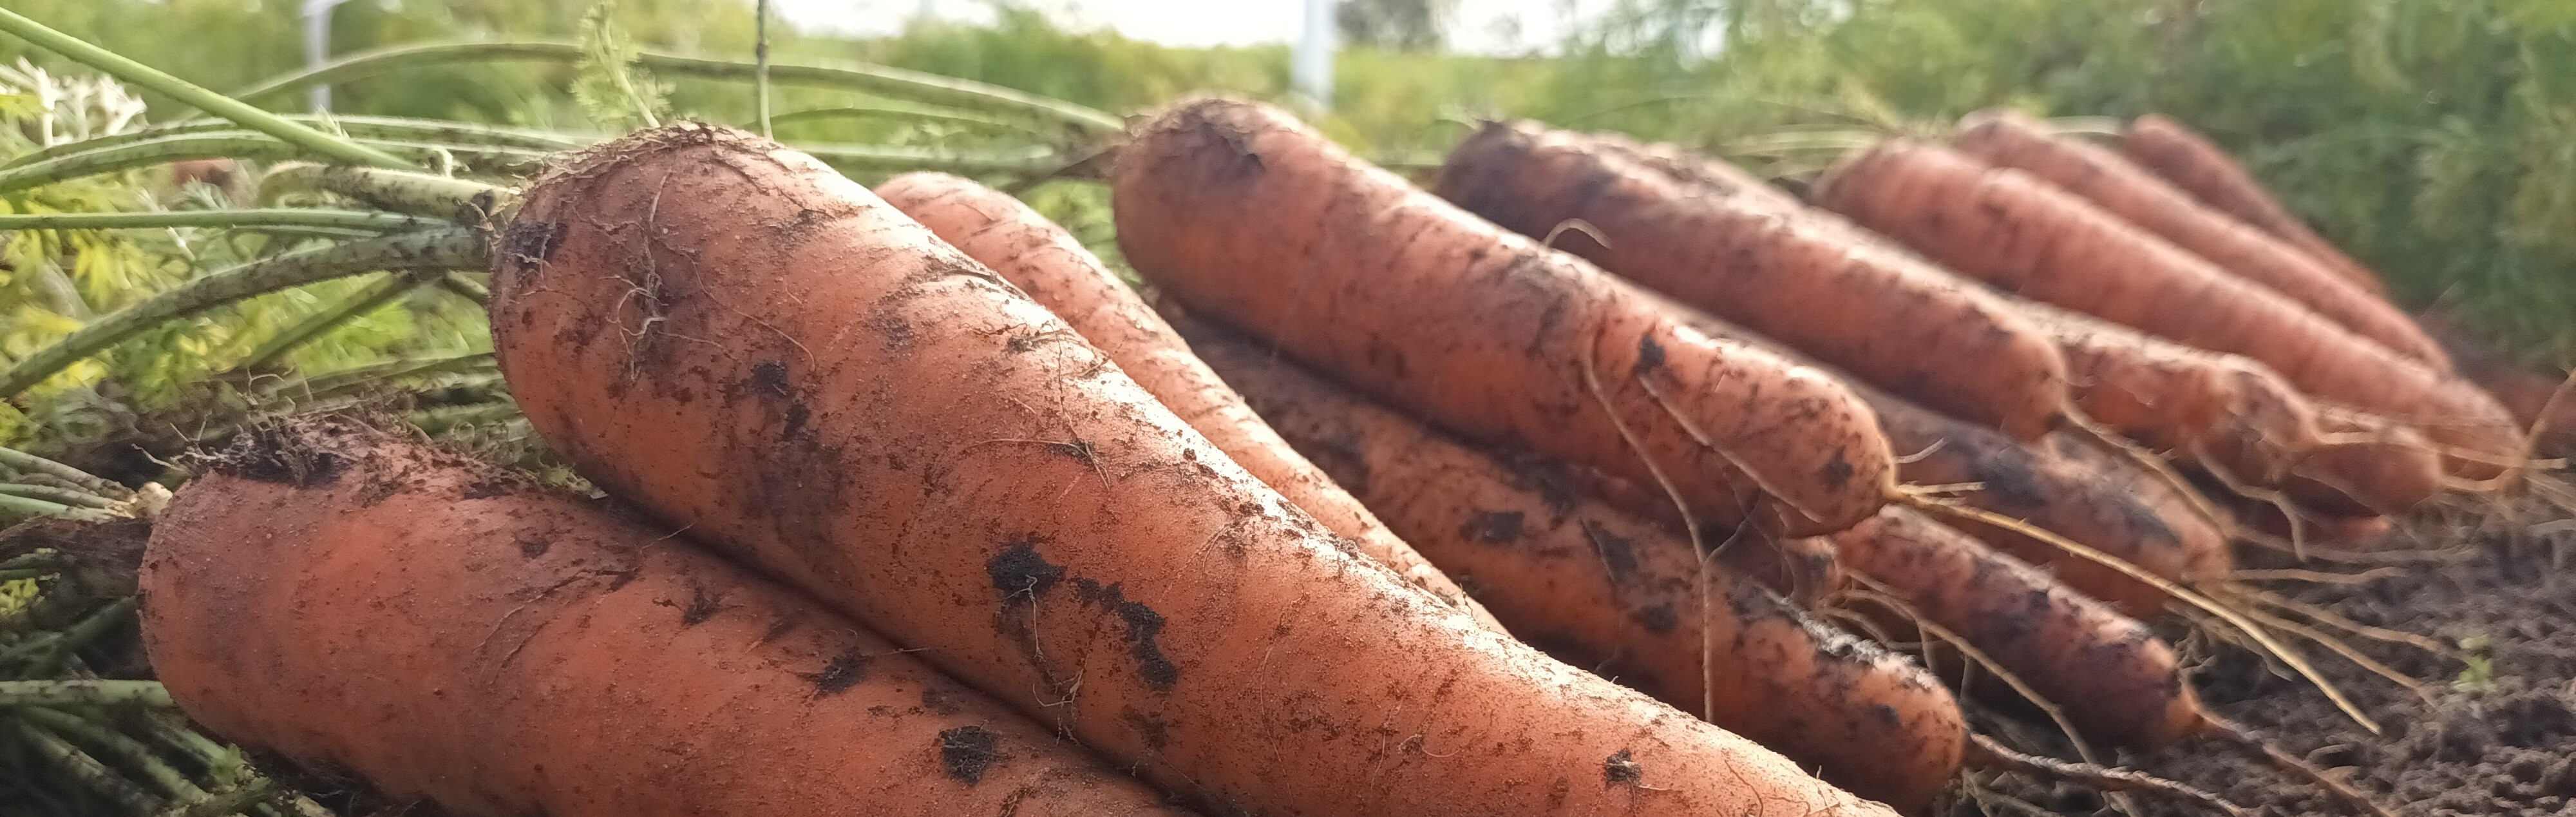 Carrots lying on the ground in a field